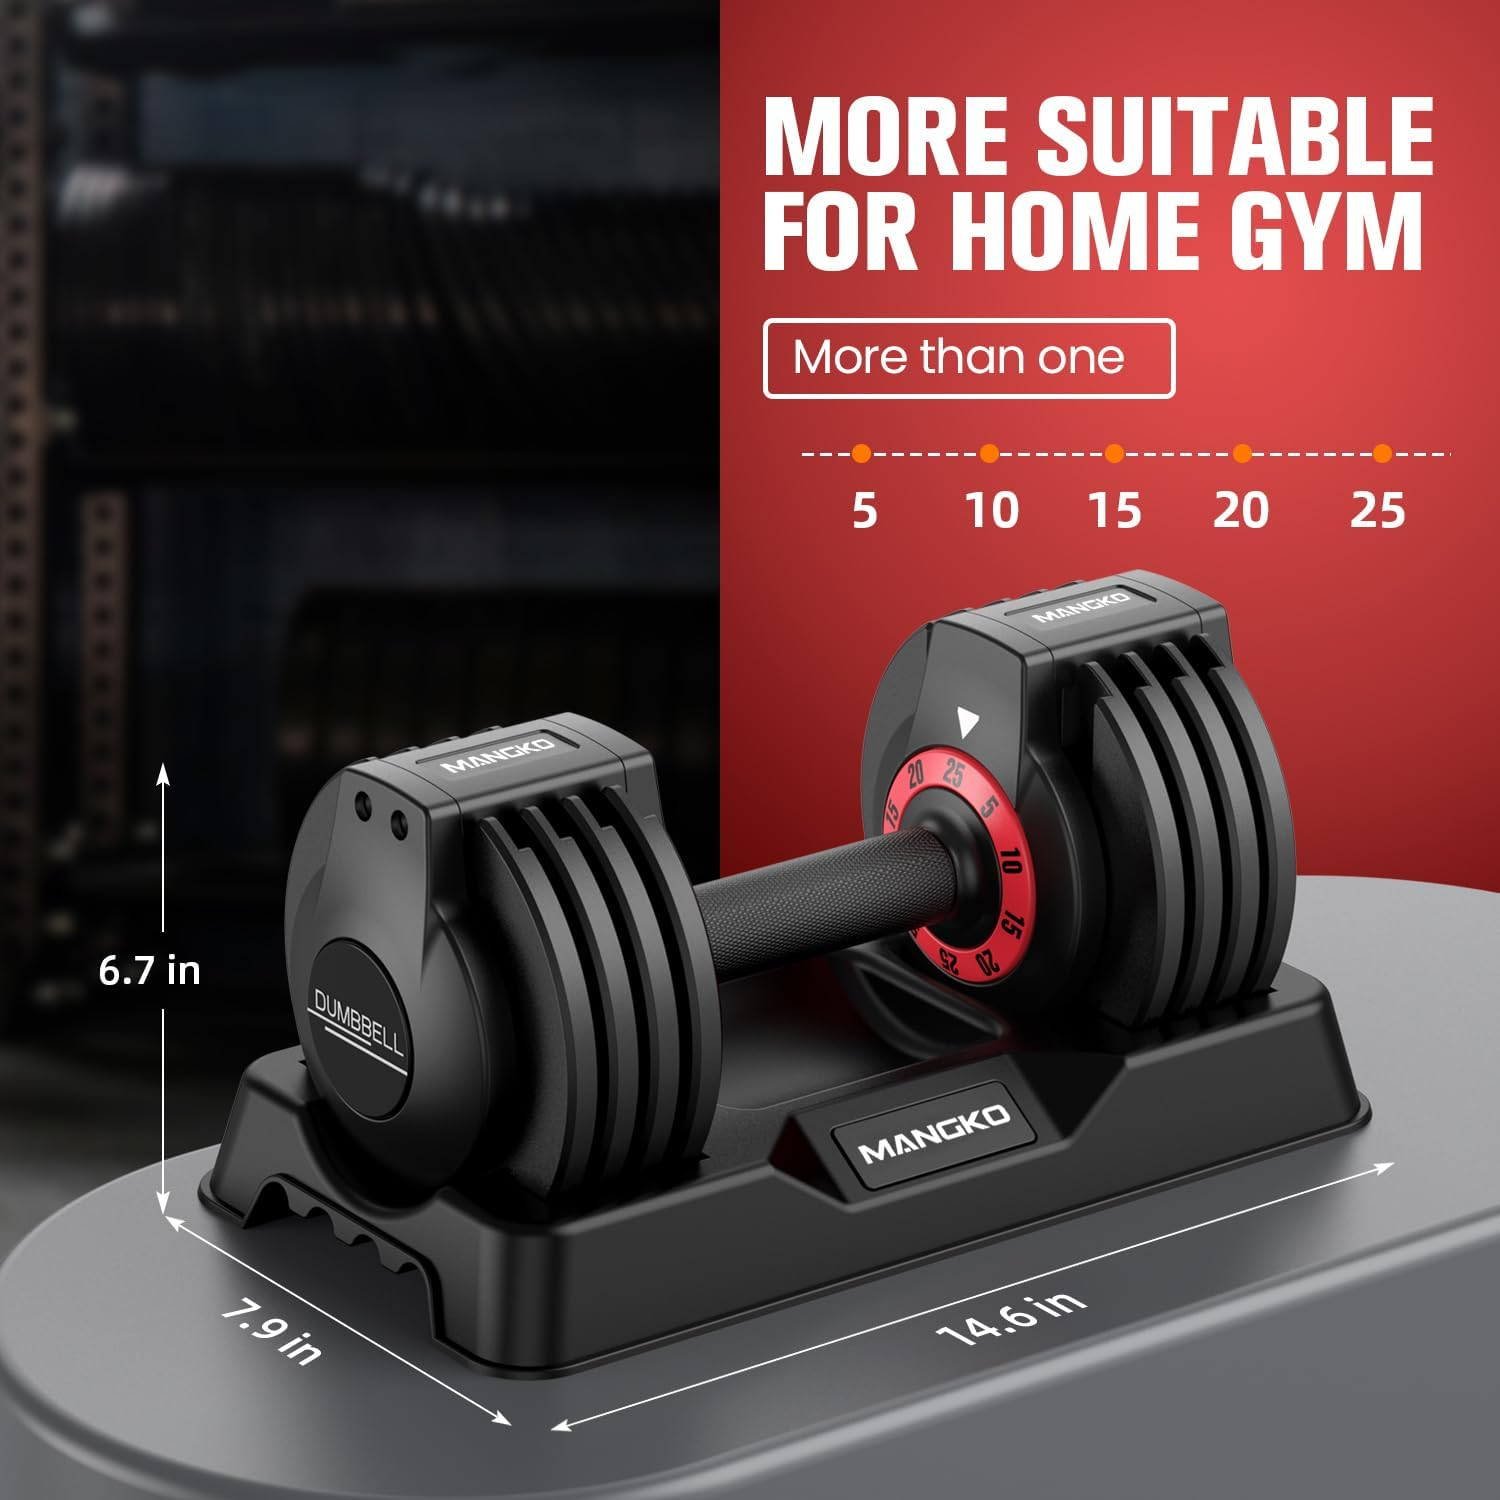 Adjustable Dumbbells 25LB Single Dumbbell 5 in 1 Free Dumbbell Weight Adjust with Anti-Slip Metal Handle, Ideal for Full-Body Home Gym Workouts